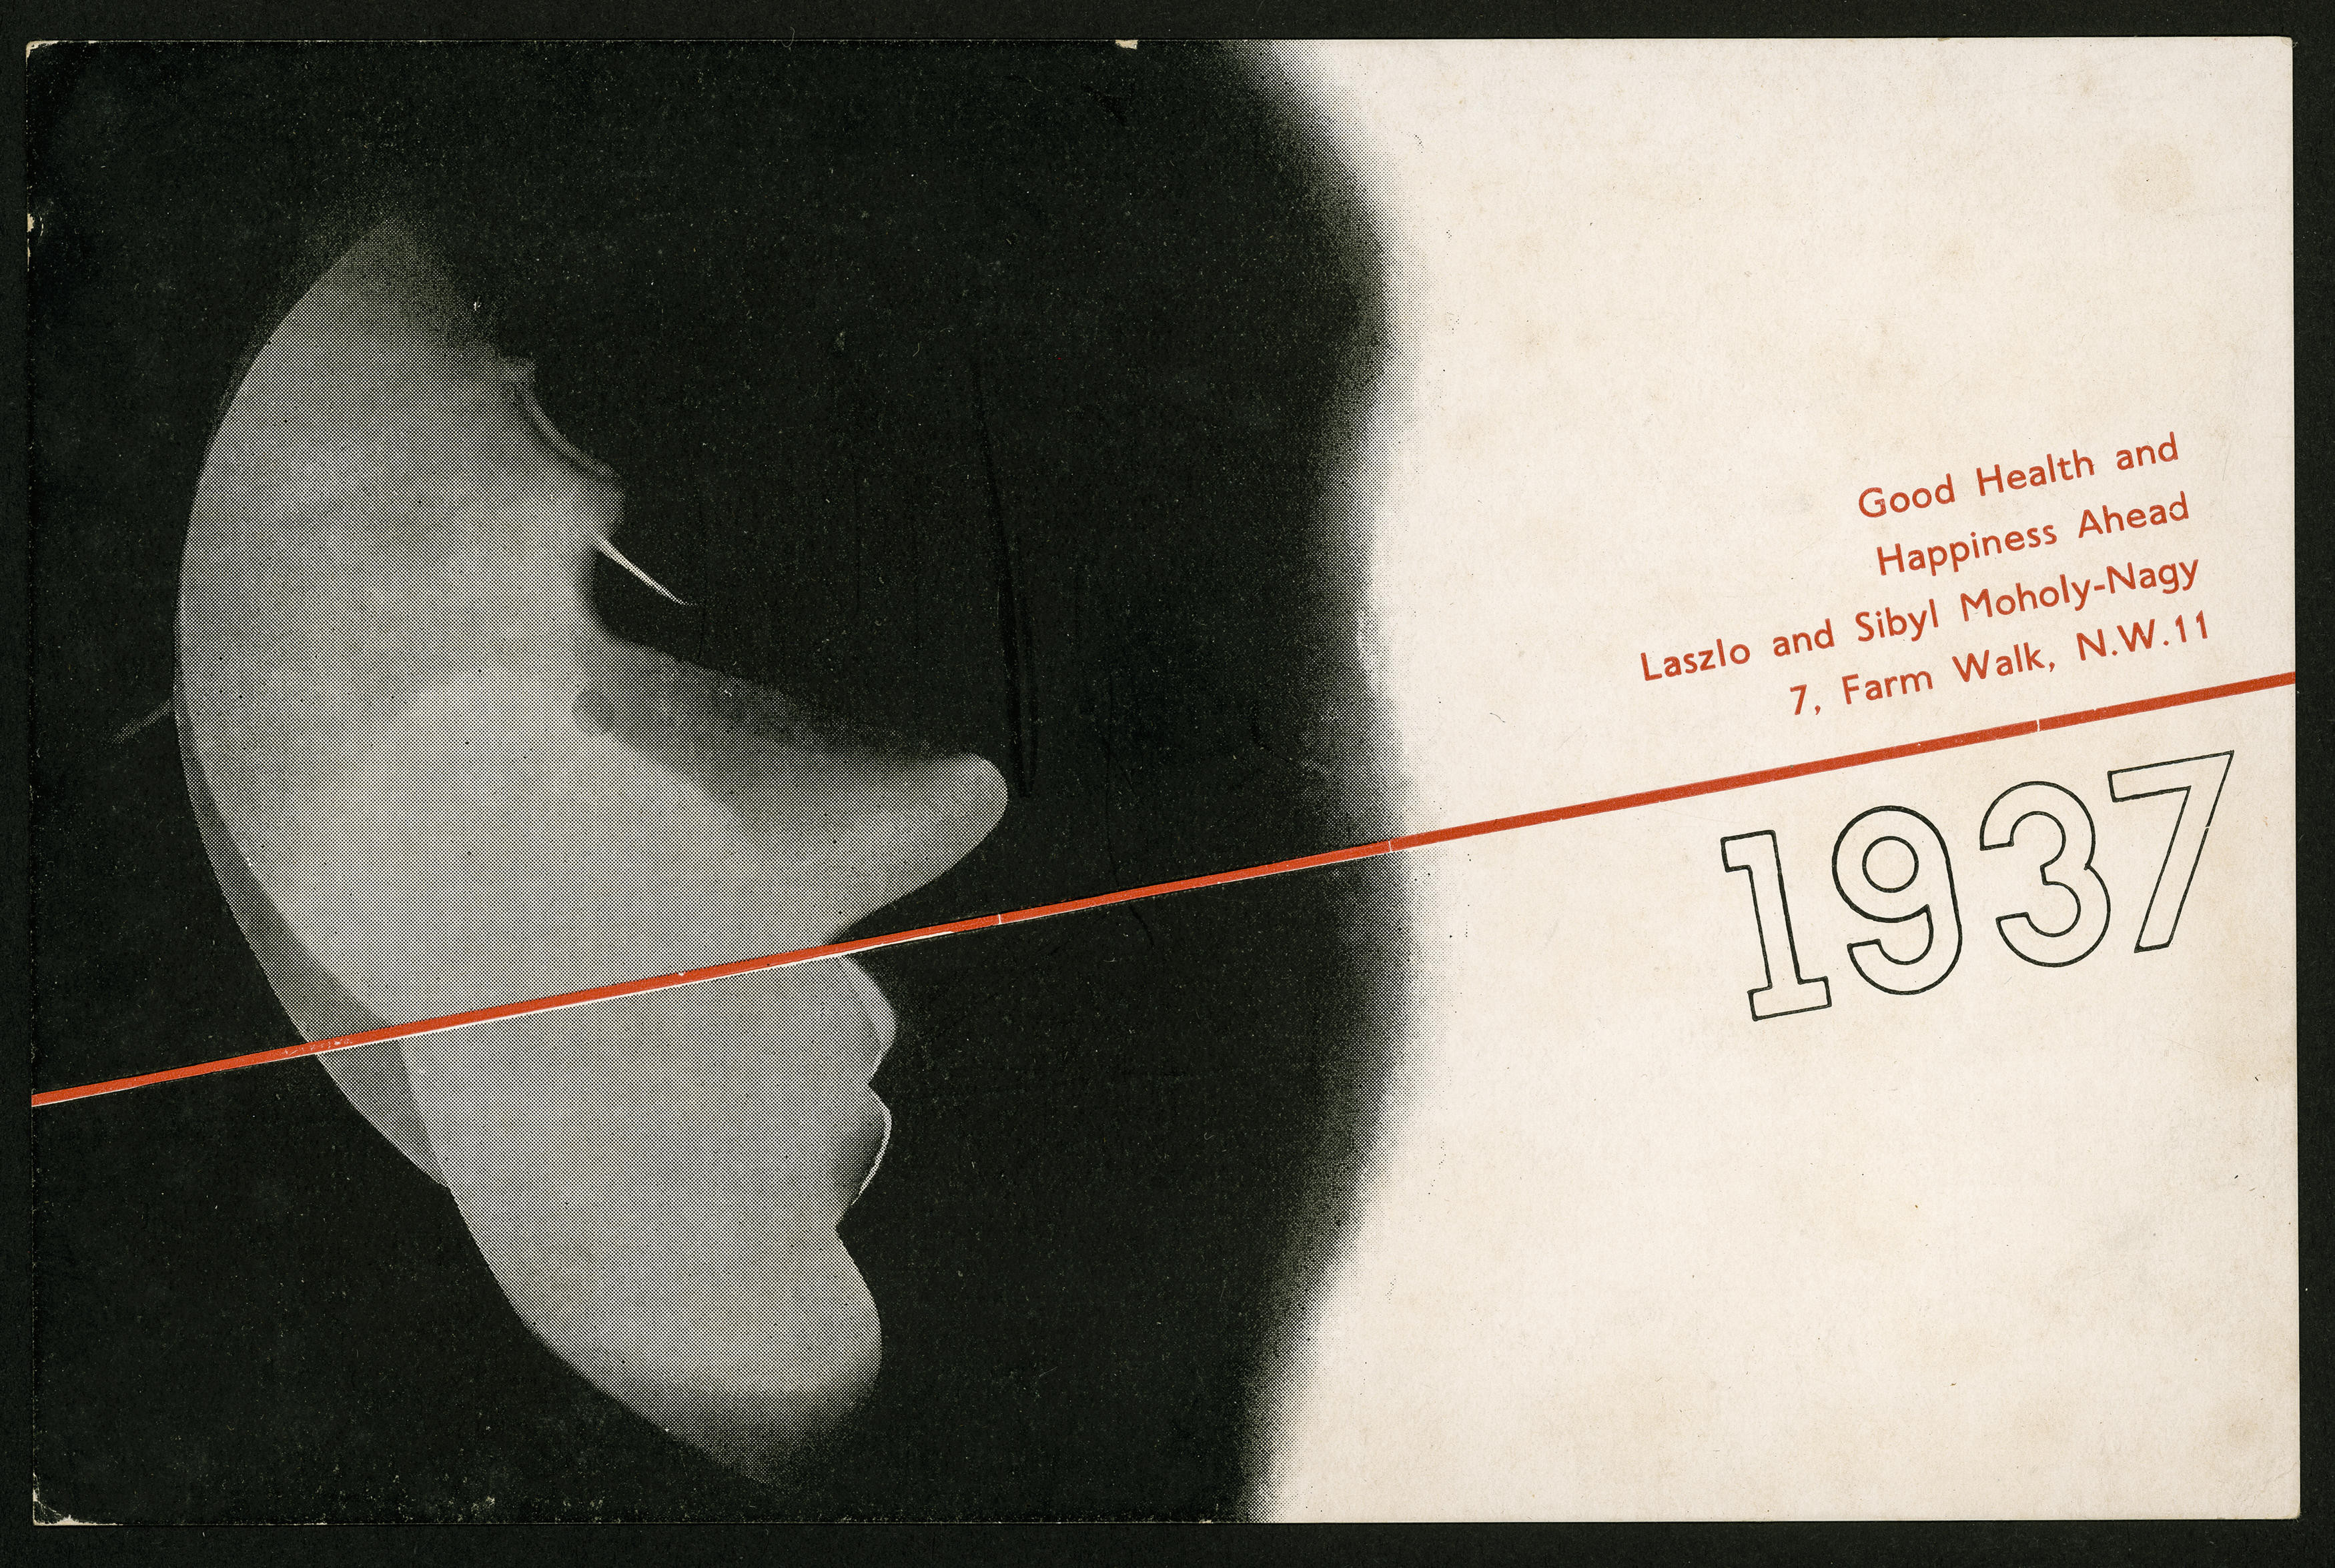 Black and white postcard with a stylised profile of a face on the left, and red and black text on the right which reads: Good Health and Happiness Ahead / Laszlo and Sybil Moholy-Nagy / 7, Farm Walk, N.W. 11 / 1937.